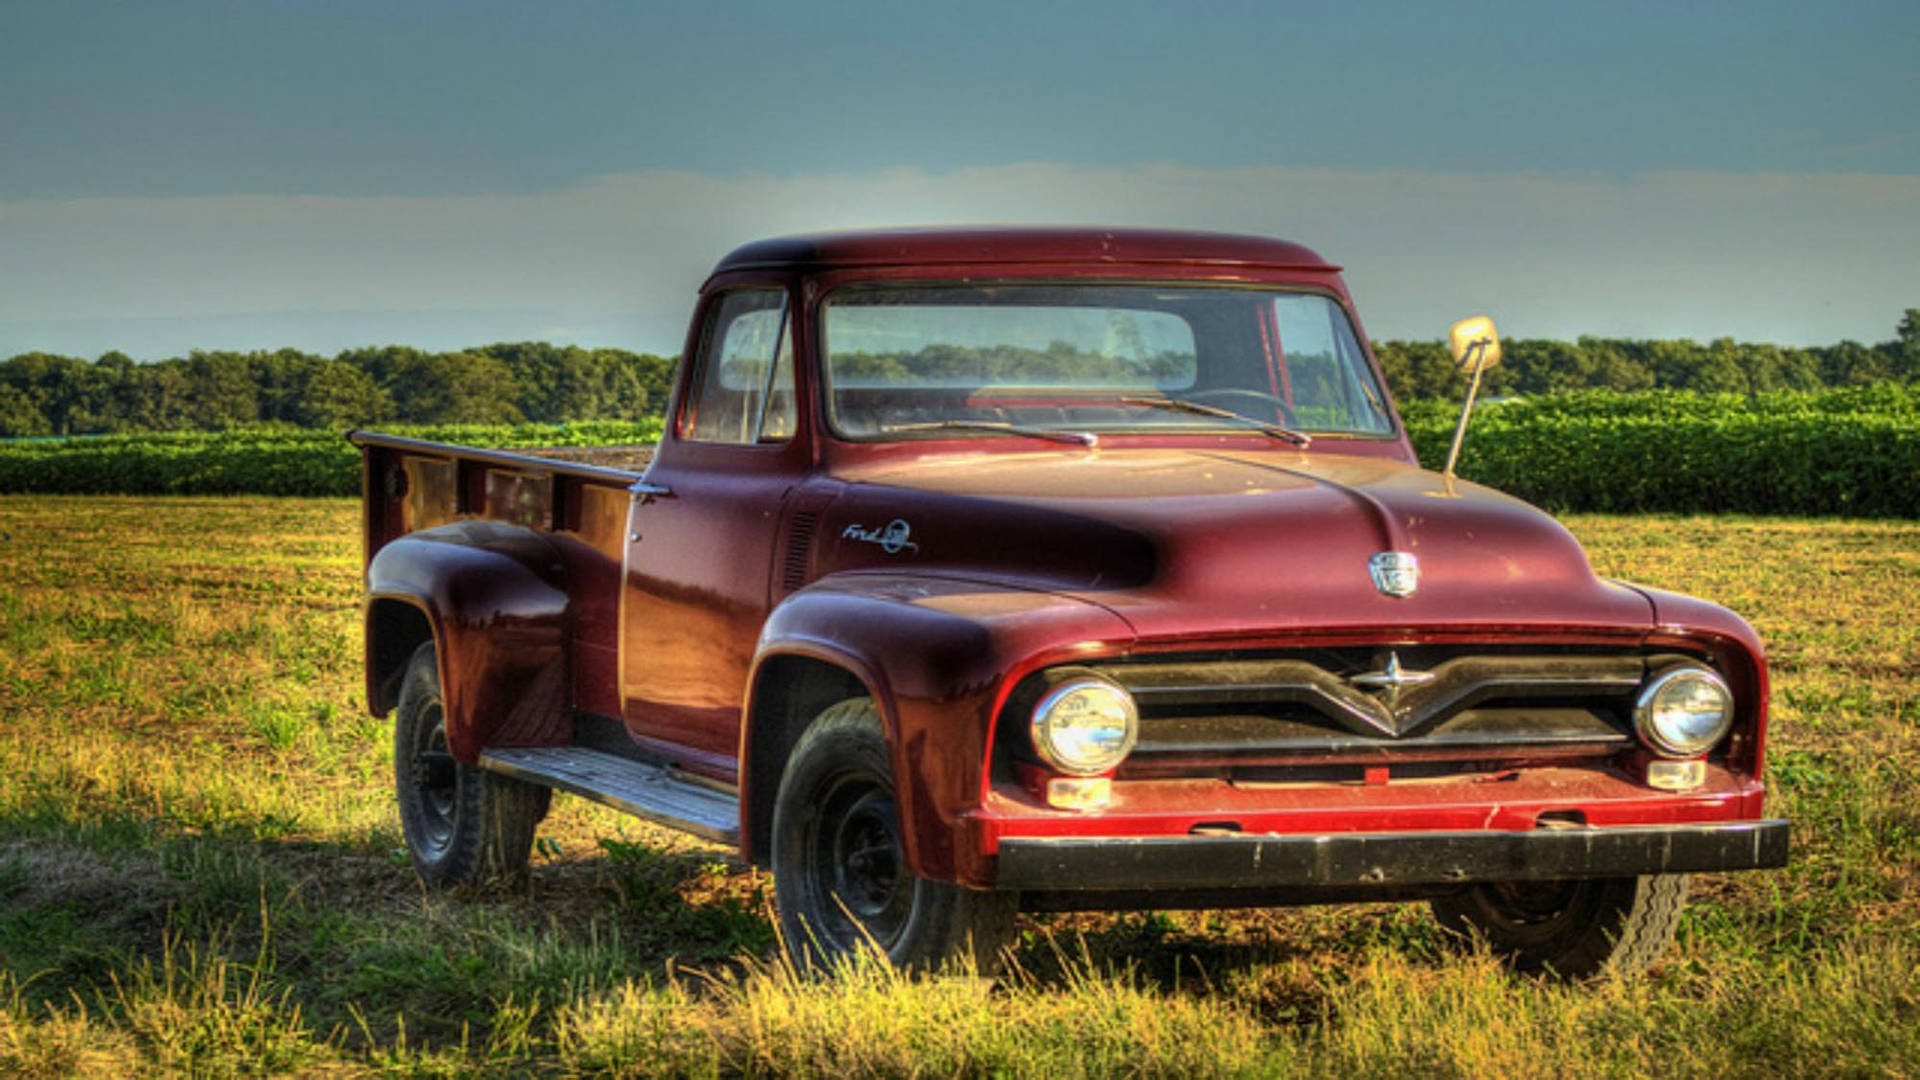 1920x1080 Download 1953 Red Old Ford Truck Wallpaper